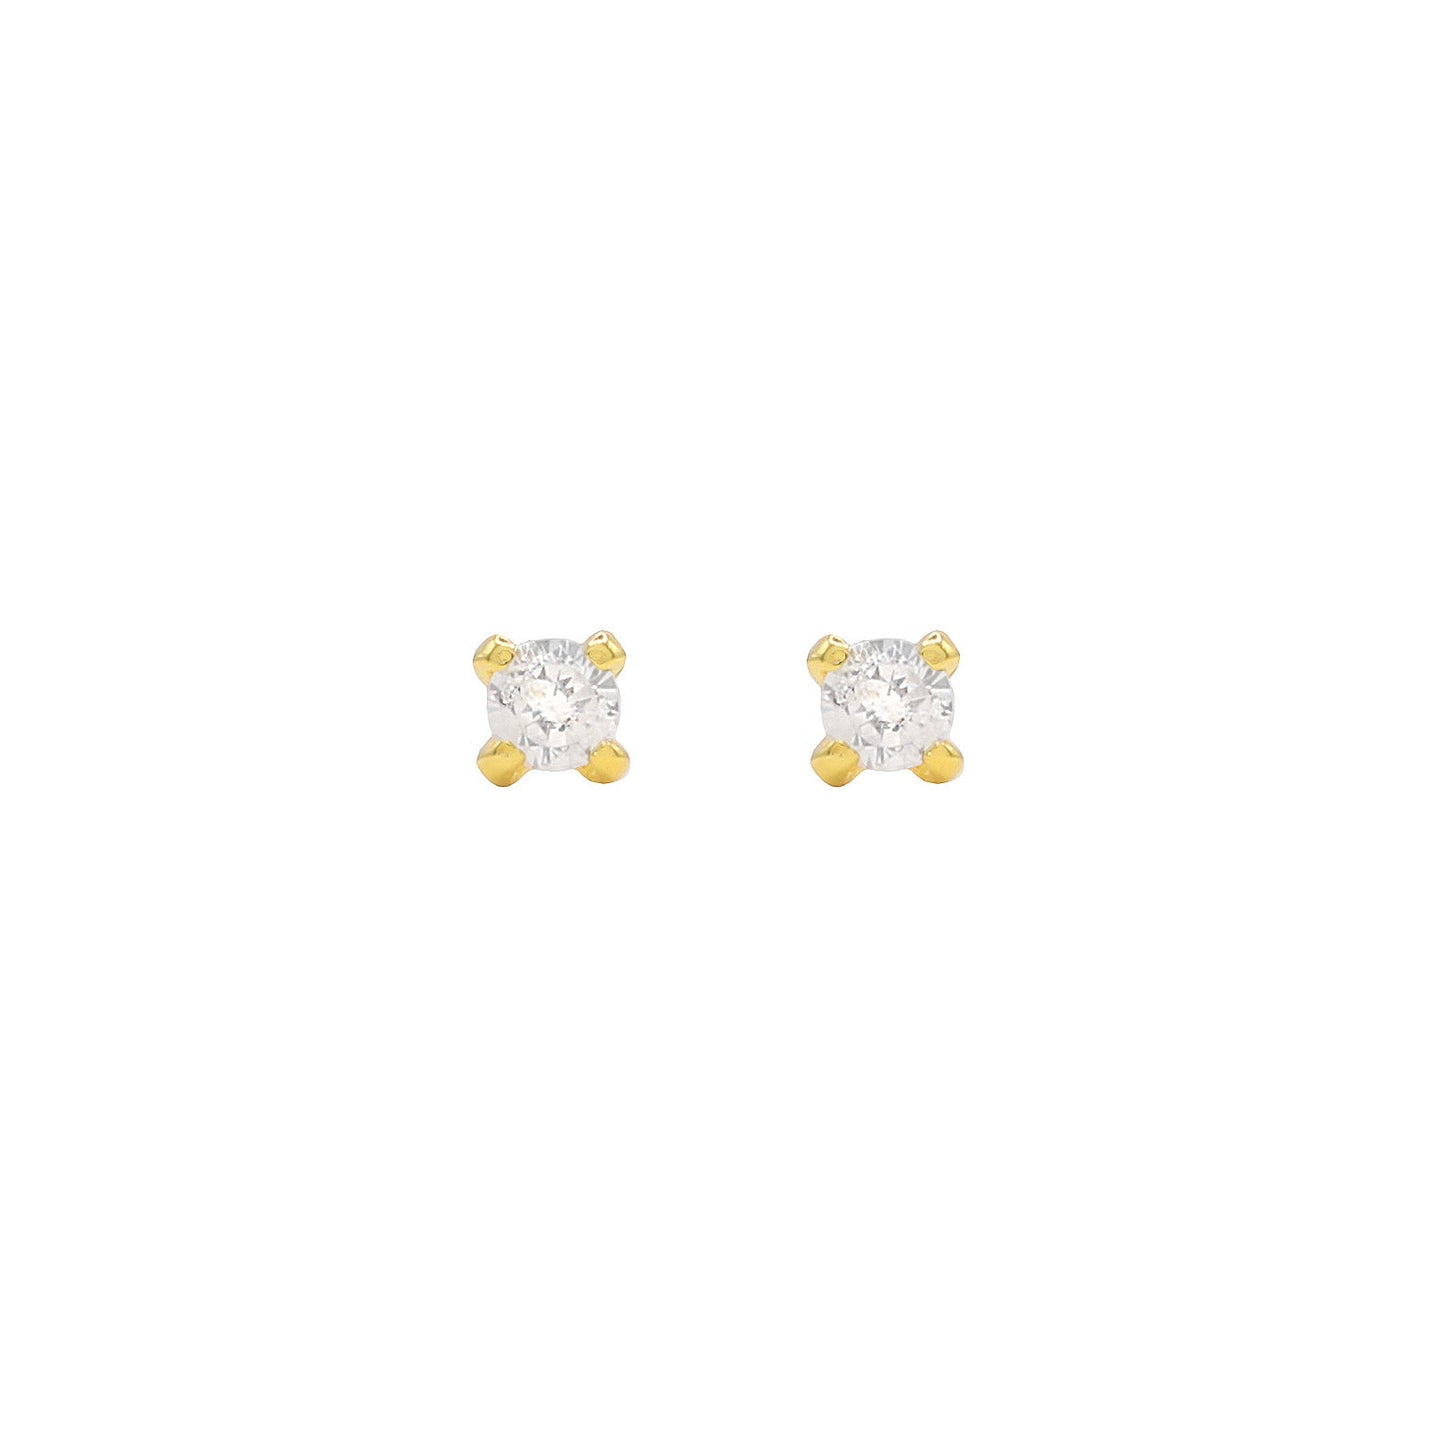 BABY CRYSTAL STUDS - GOLD